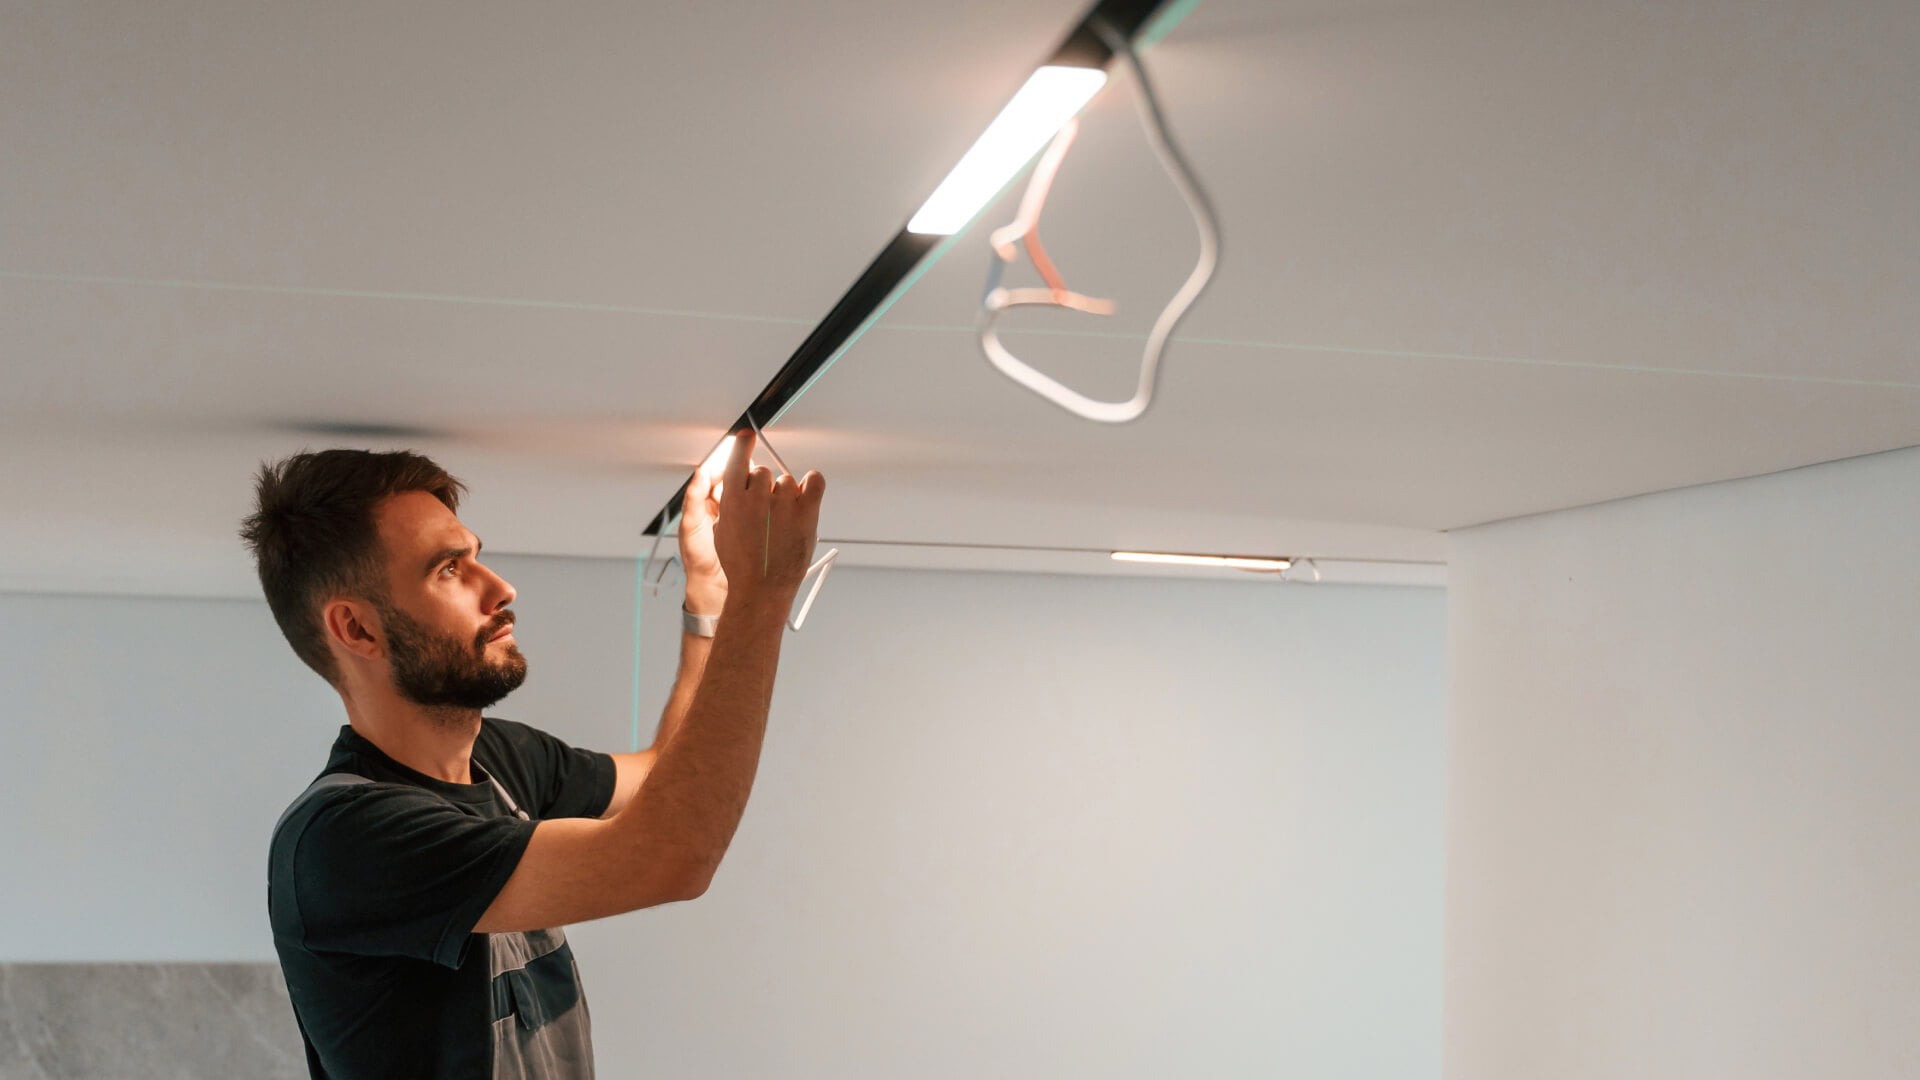 A man is performing a lighting installation in a room on the Sunshine Coast.